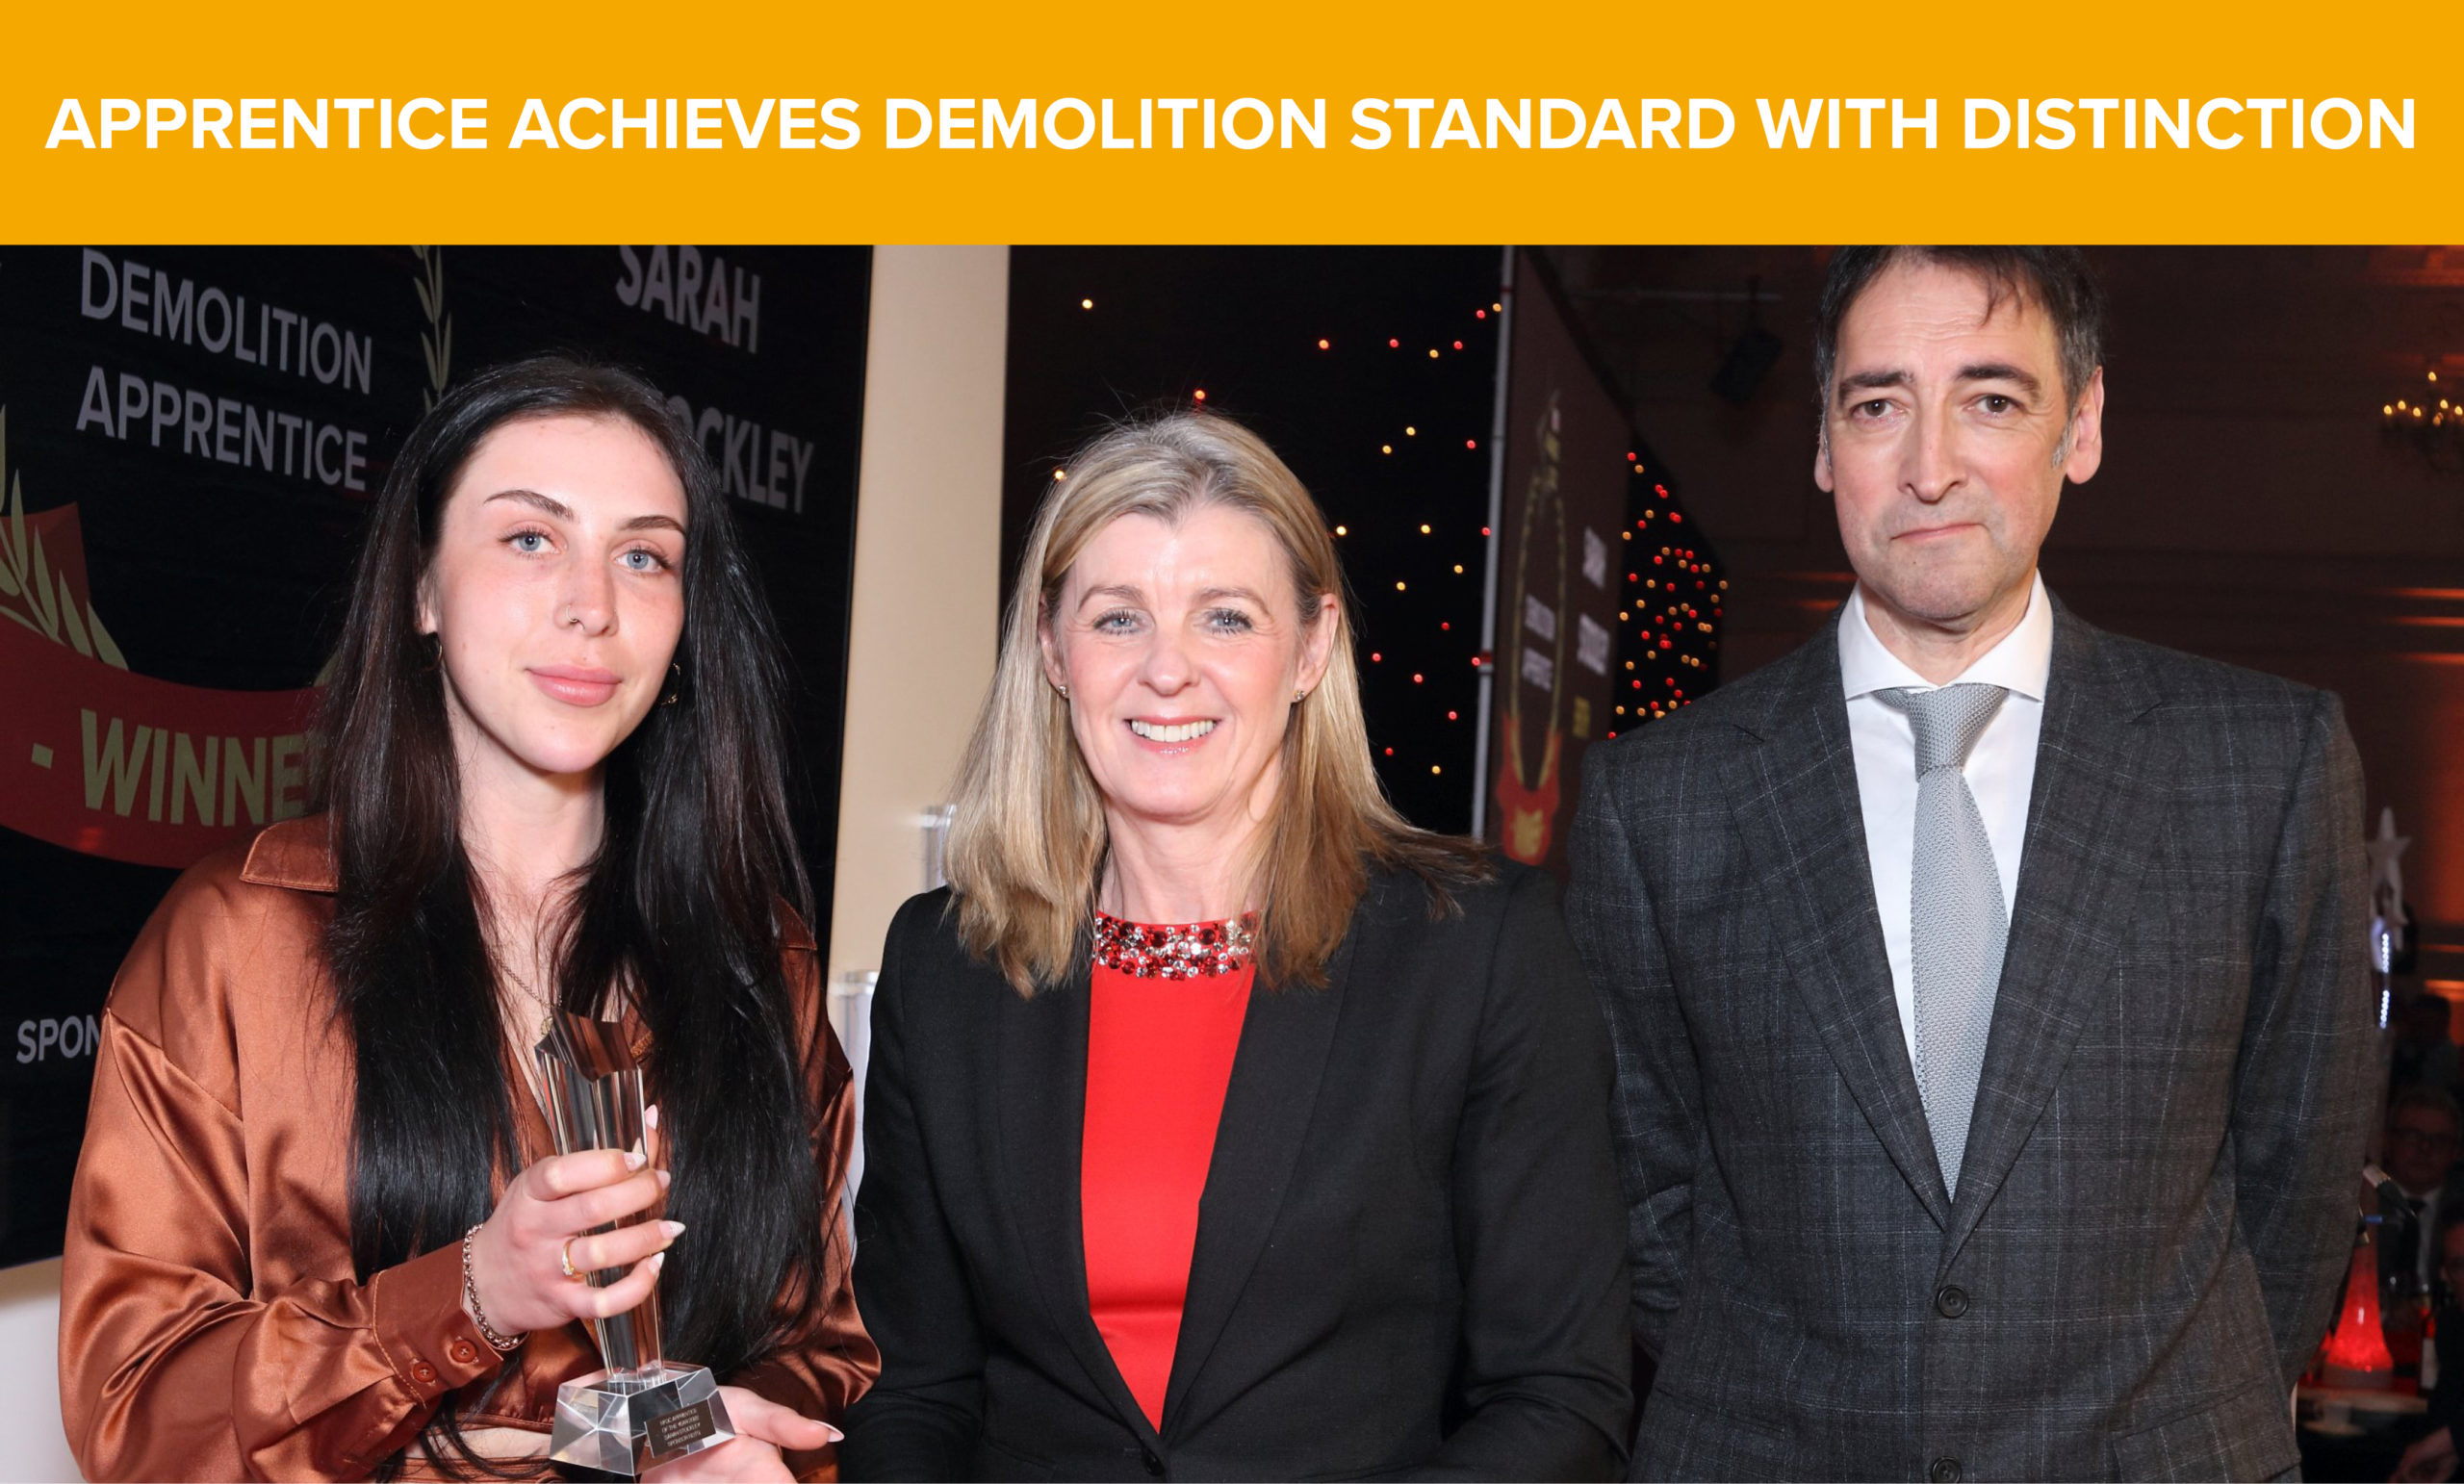 With Distinction! First female Demolition Apprentice aces assessment